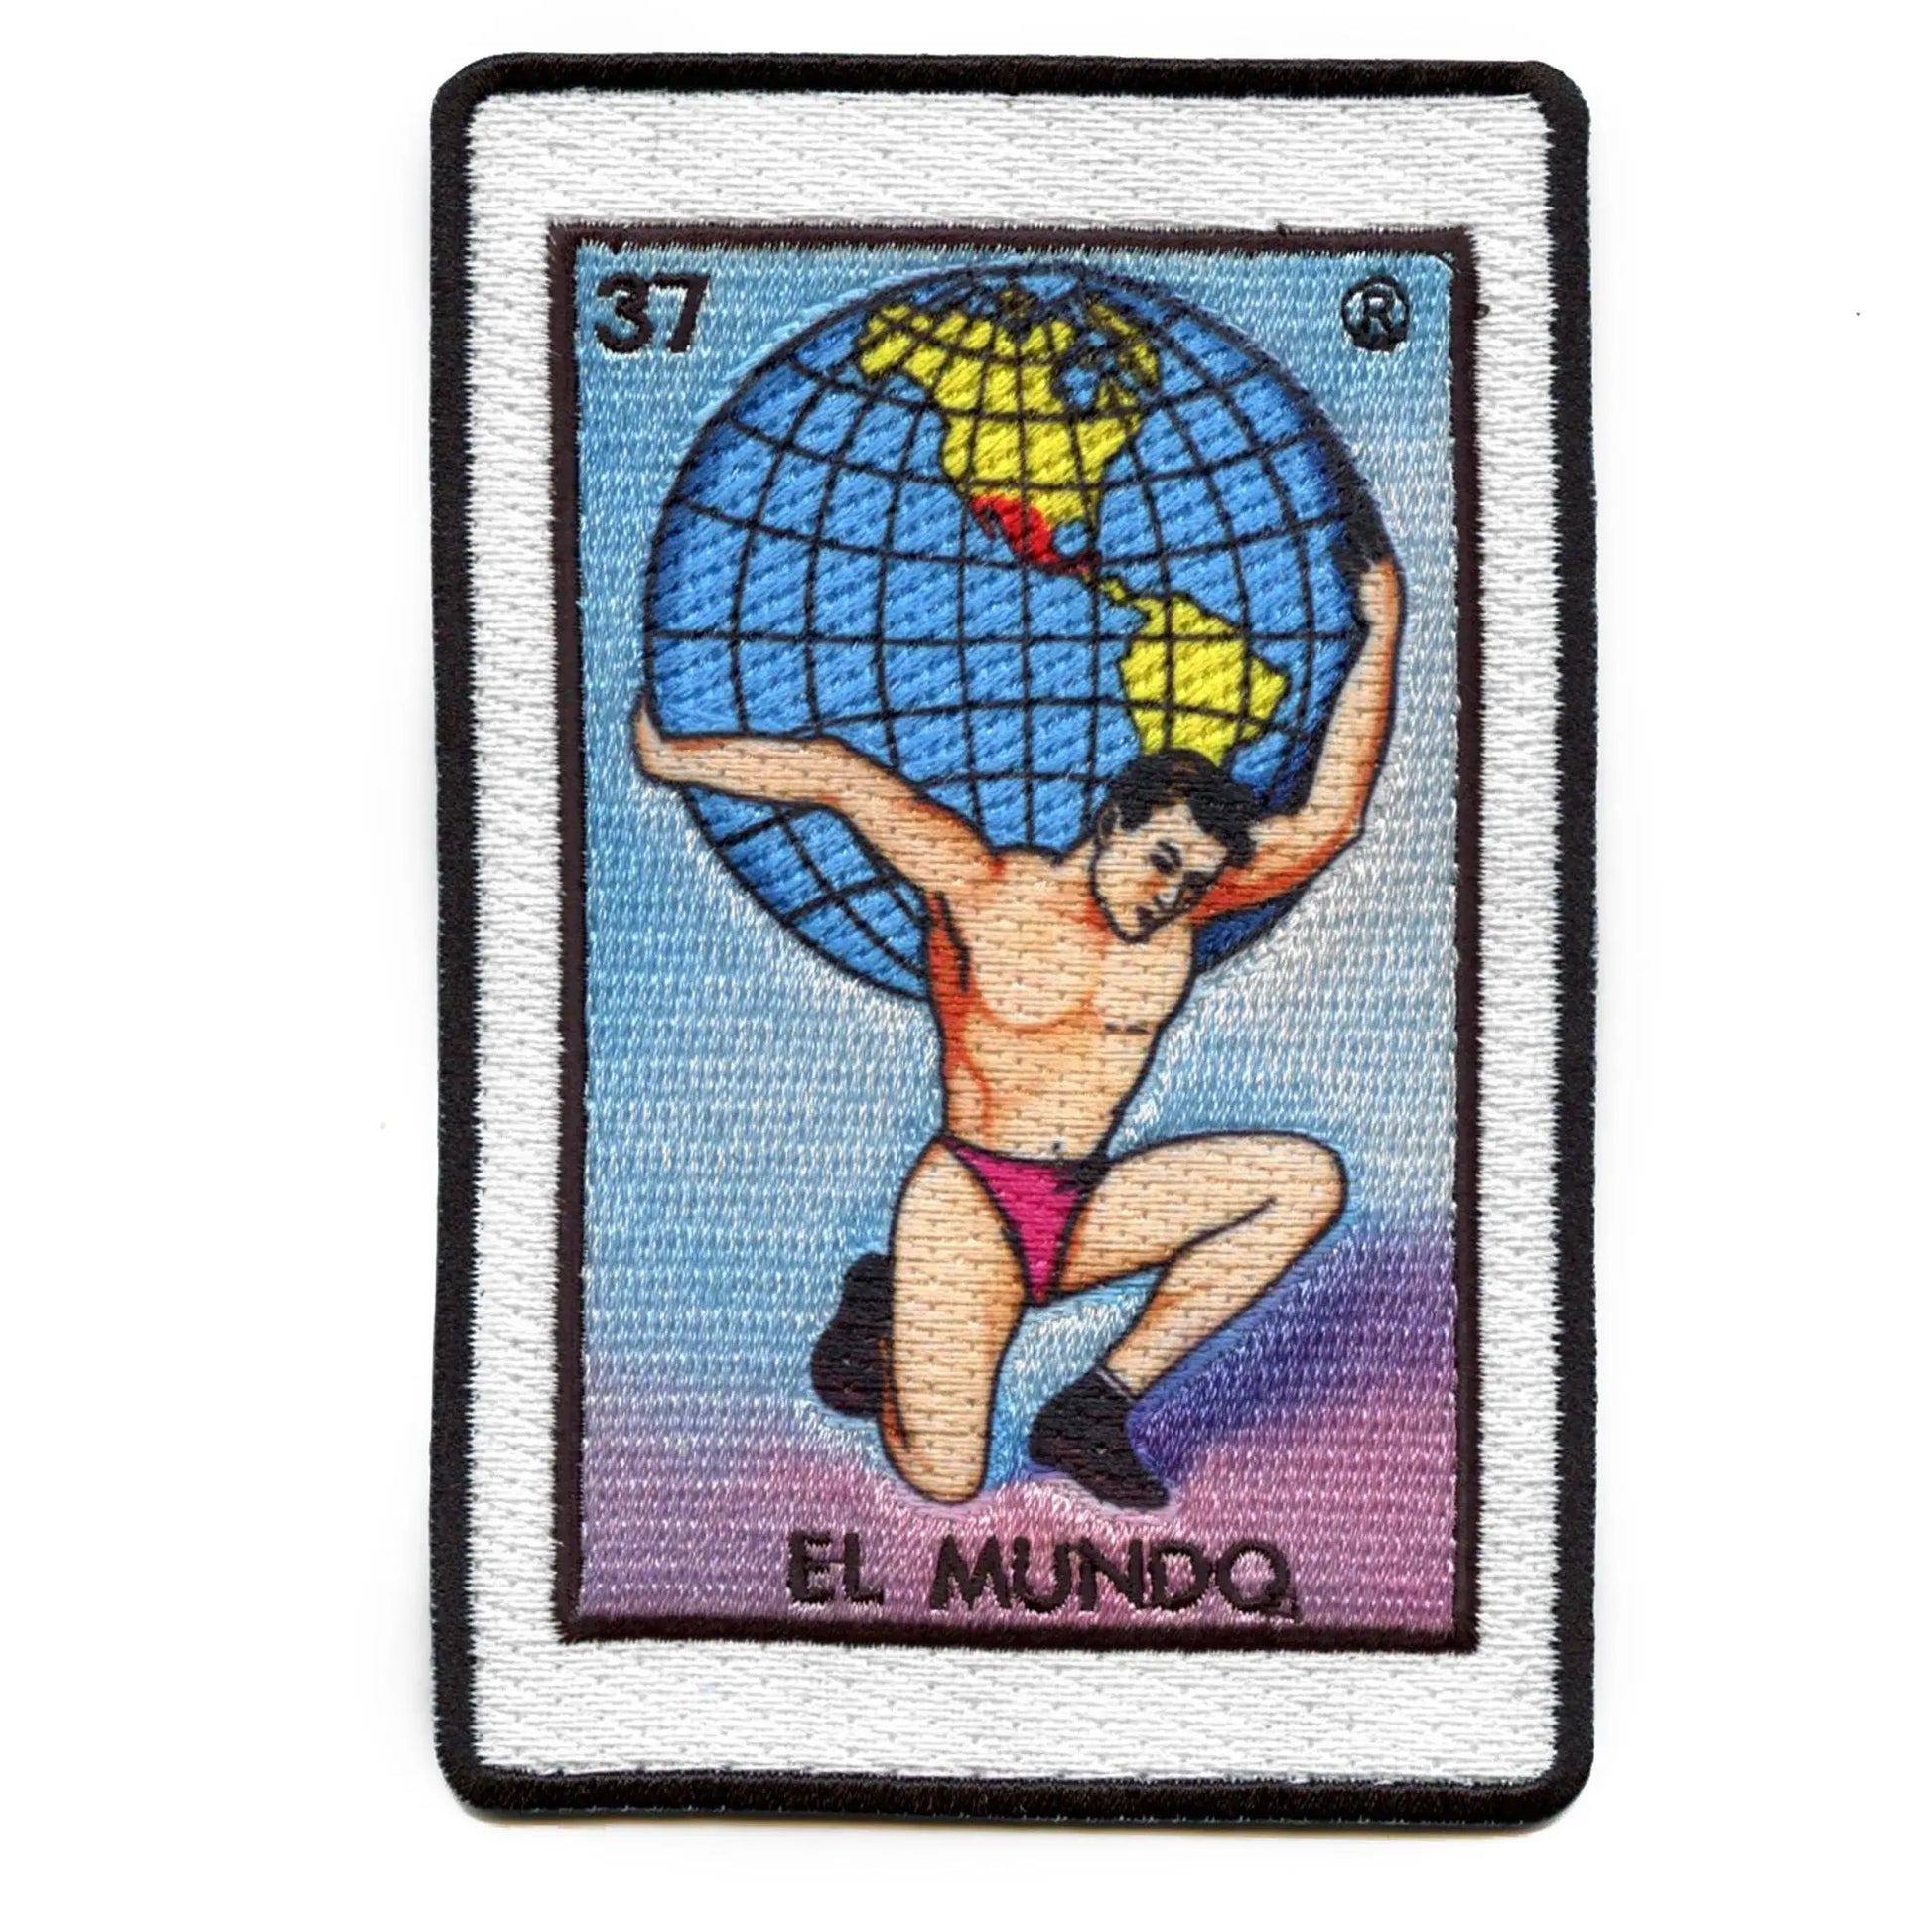 El Mundo 37 Patch Mexican Loteria Card Sublimated Embroidery Iron On